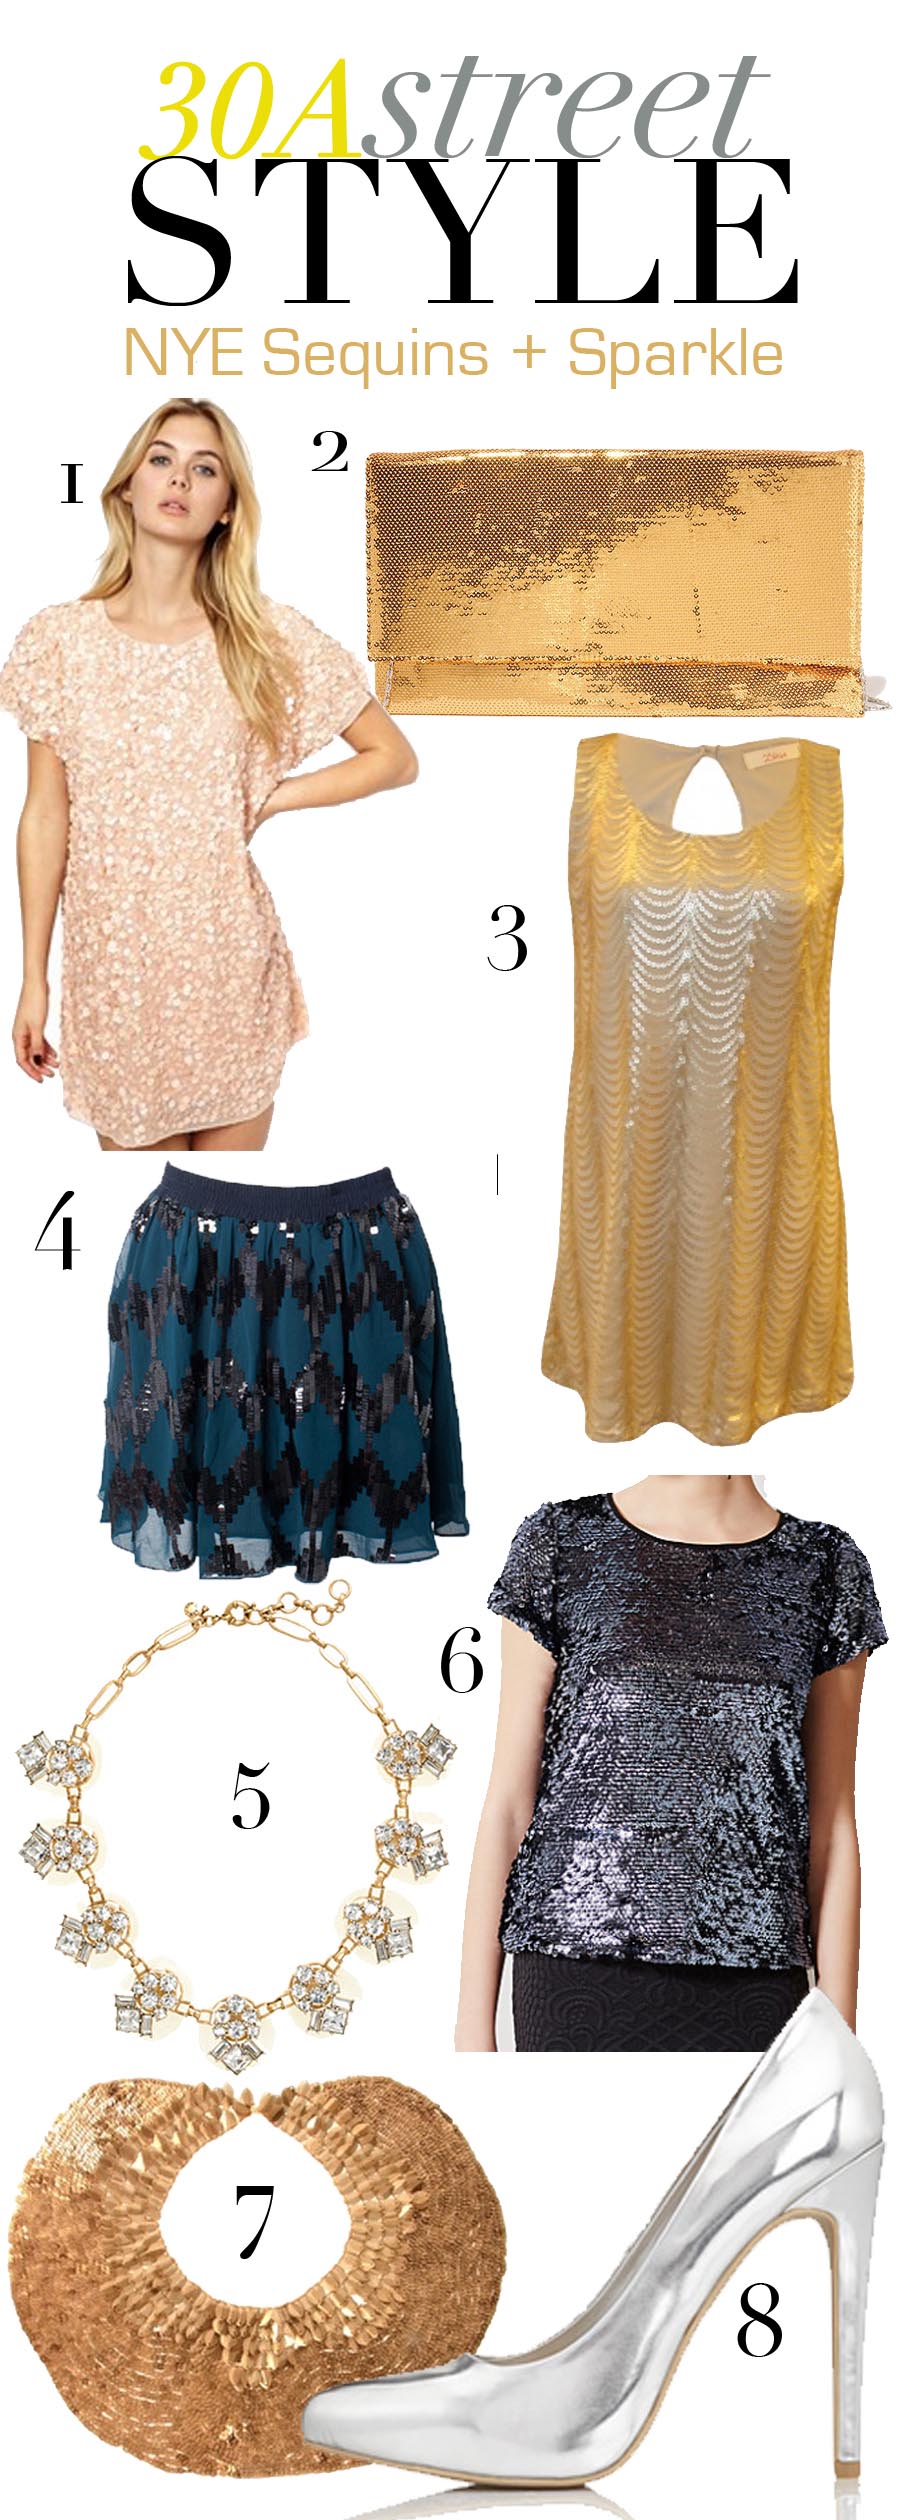 New Year's Eve Style Guide - Sequins Sparkle  |  30A Street Style